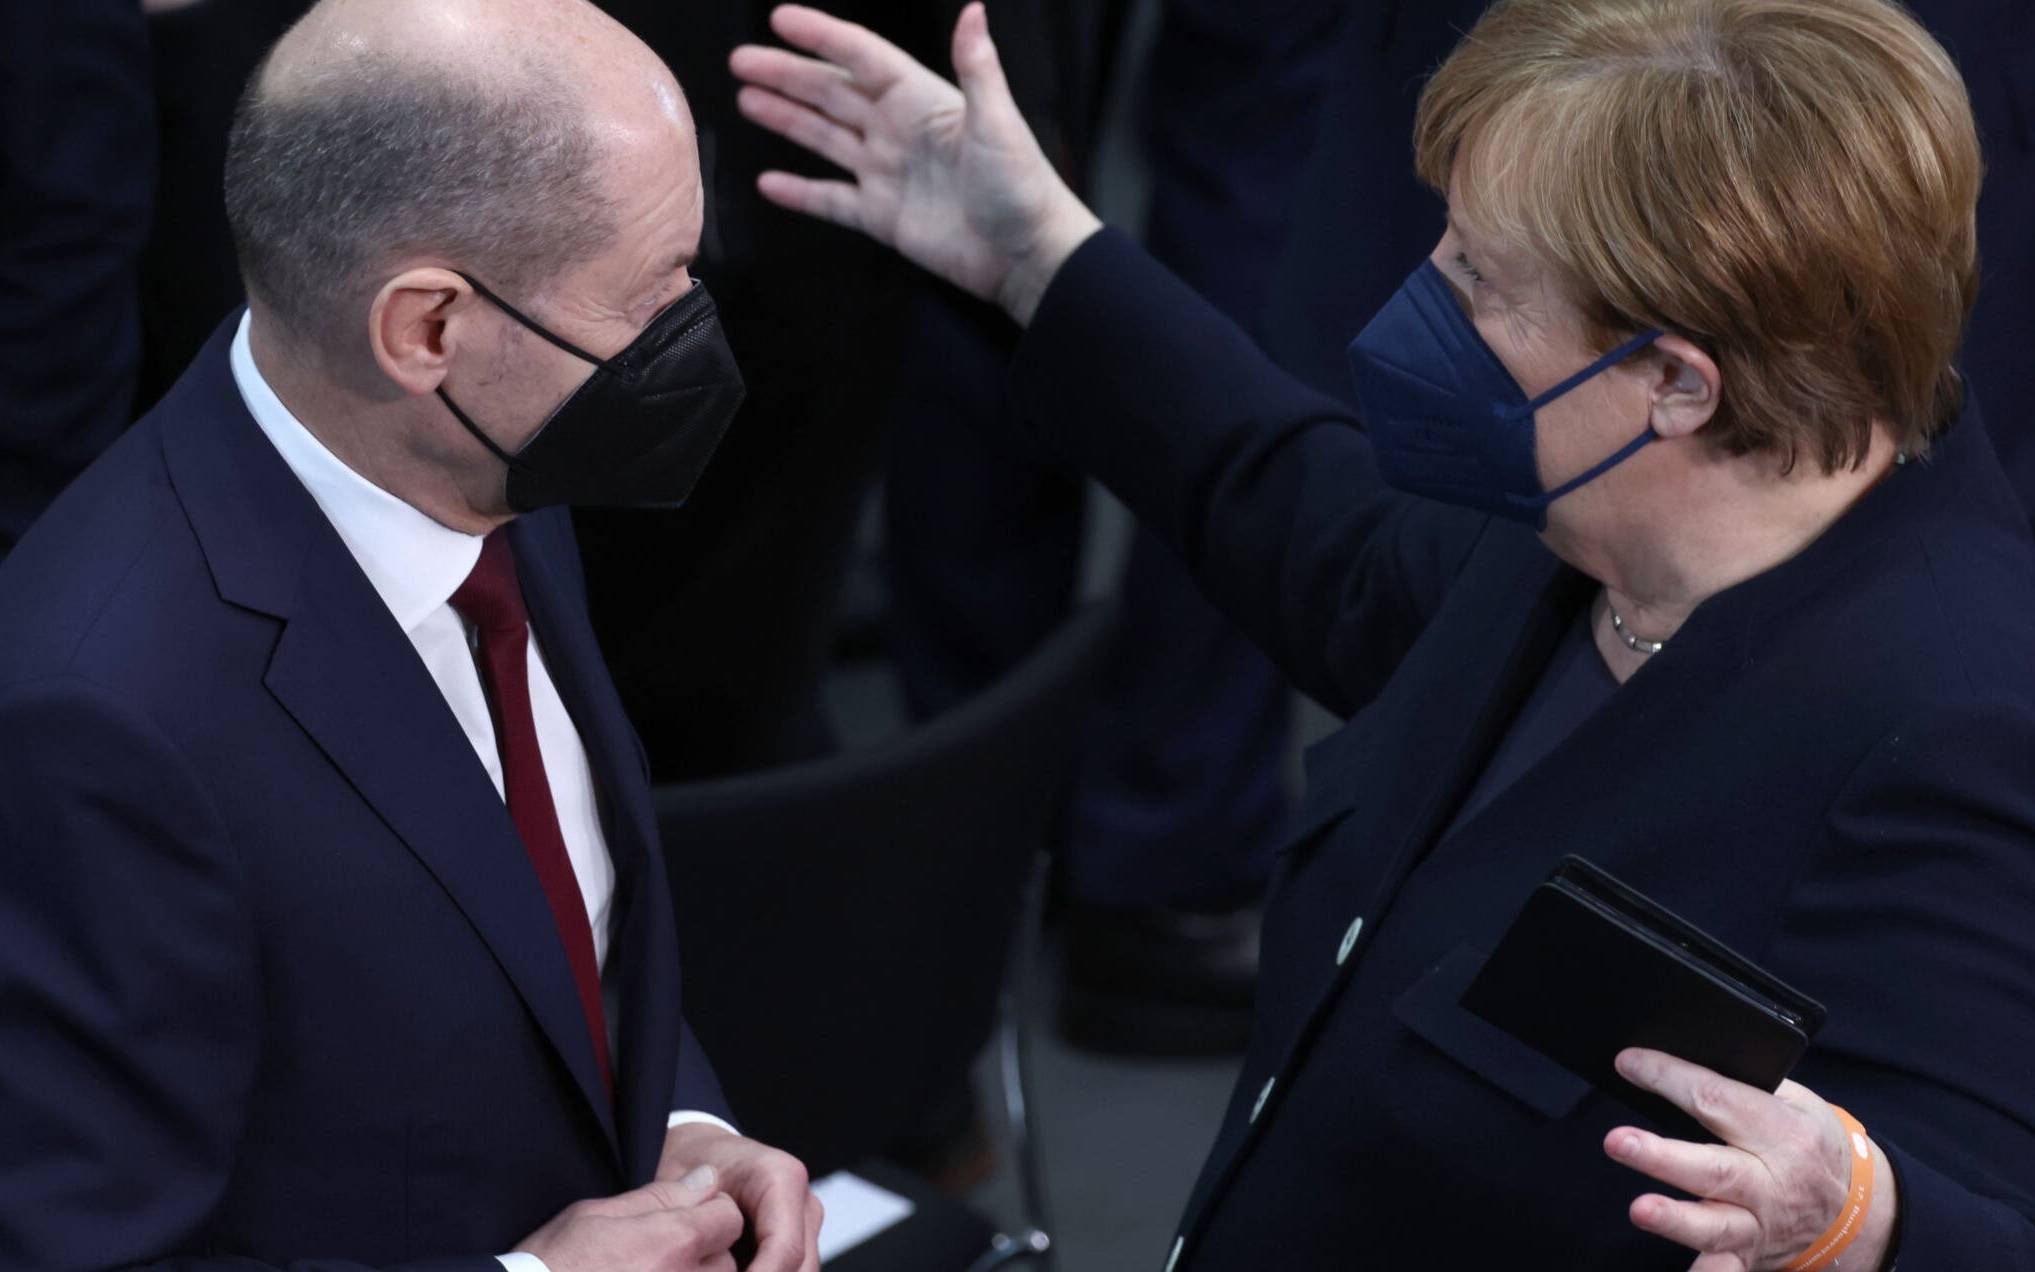 Former German Chancellor Angela Merkel and German Chancellor Olaf Scholz talk as they arrive for the assembly of the Federal Convention on February 13, 2022 at the Paul-Loebe-Haus parliamentary building in Berlin, prior to the election of Germany's President. - German President Frank-Walter Steinmeier is poised to be re-elected for a second straight term, after gaining a reputation as a tireless defender of democratic values at a time when resurging far-right extremism and the coronavirus pandemic were putting them to the test. The president is voted for by the Federal Convention, a one-off assembly made up of MPs and an equal number of state delegates, taking the total number close to 1,500. (Photo by jens schlueter / AFP)